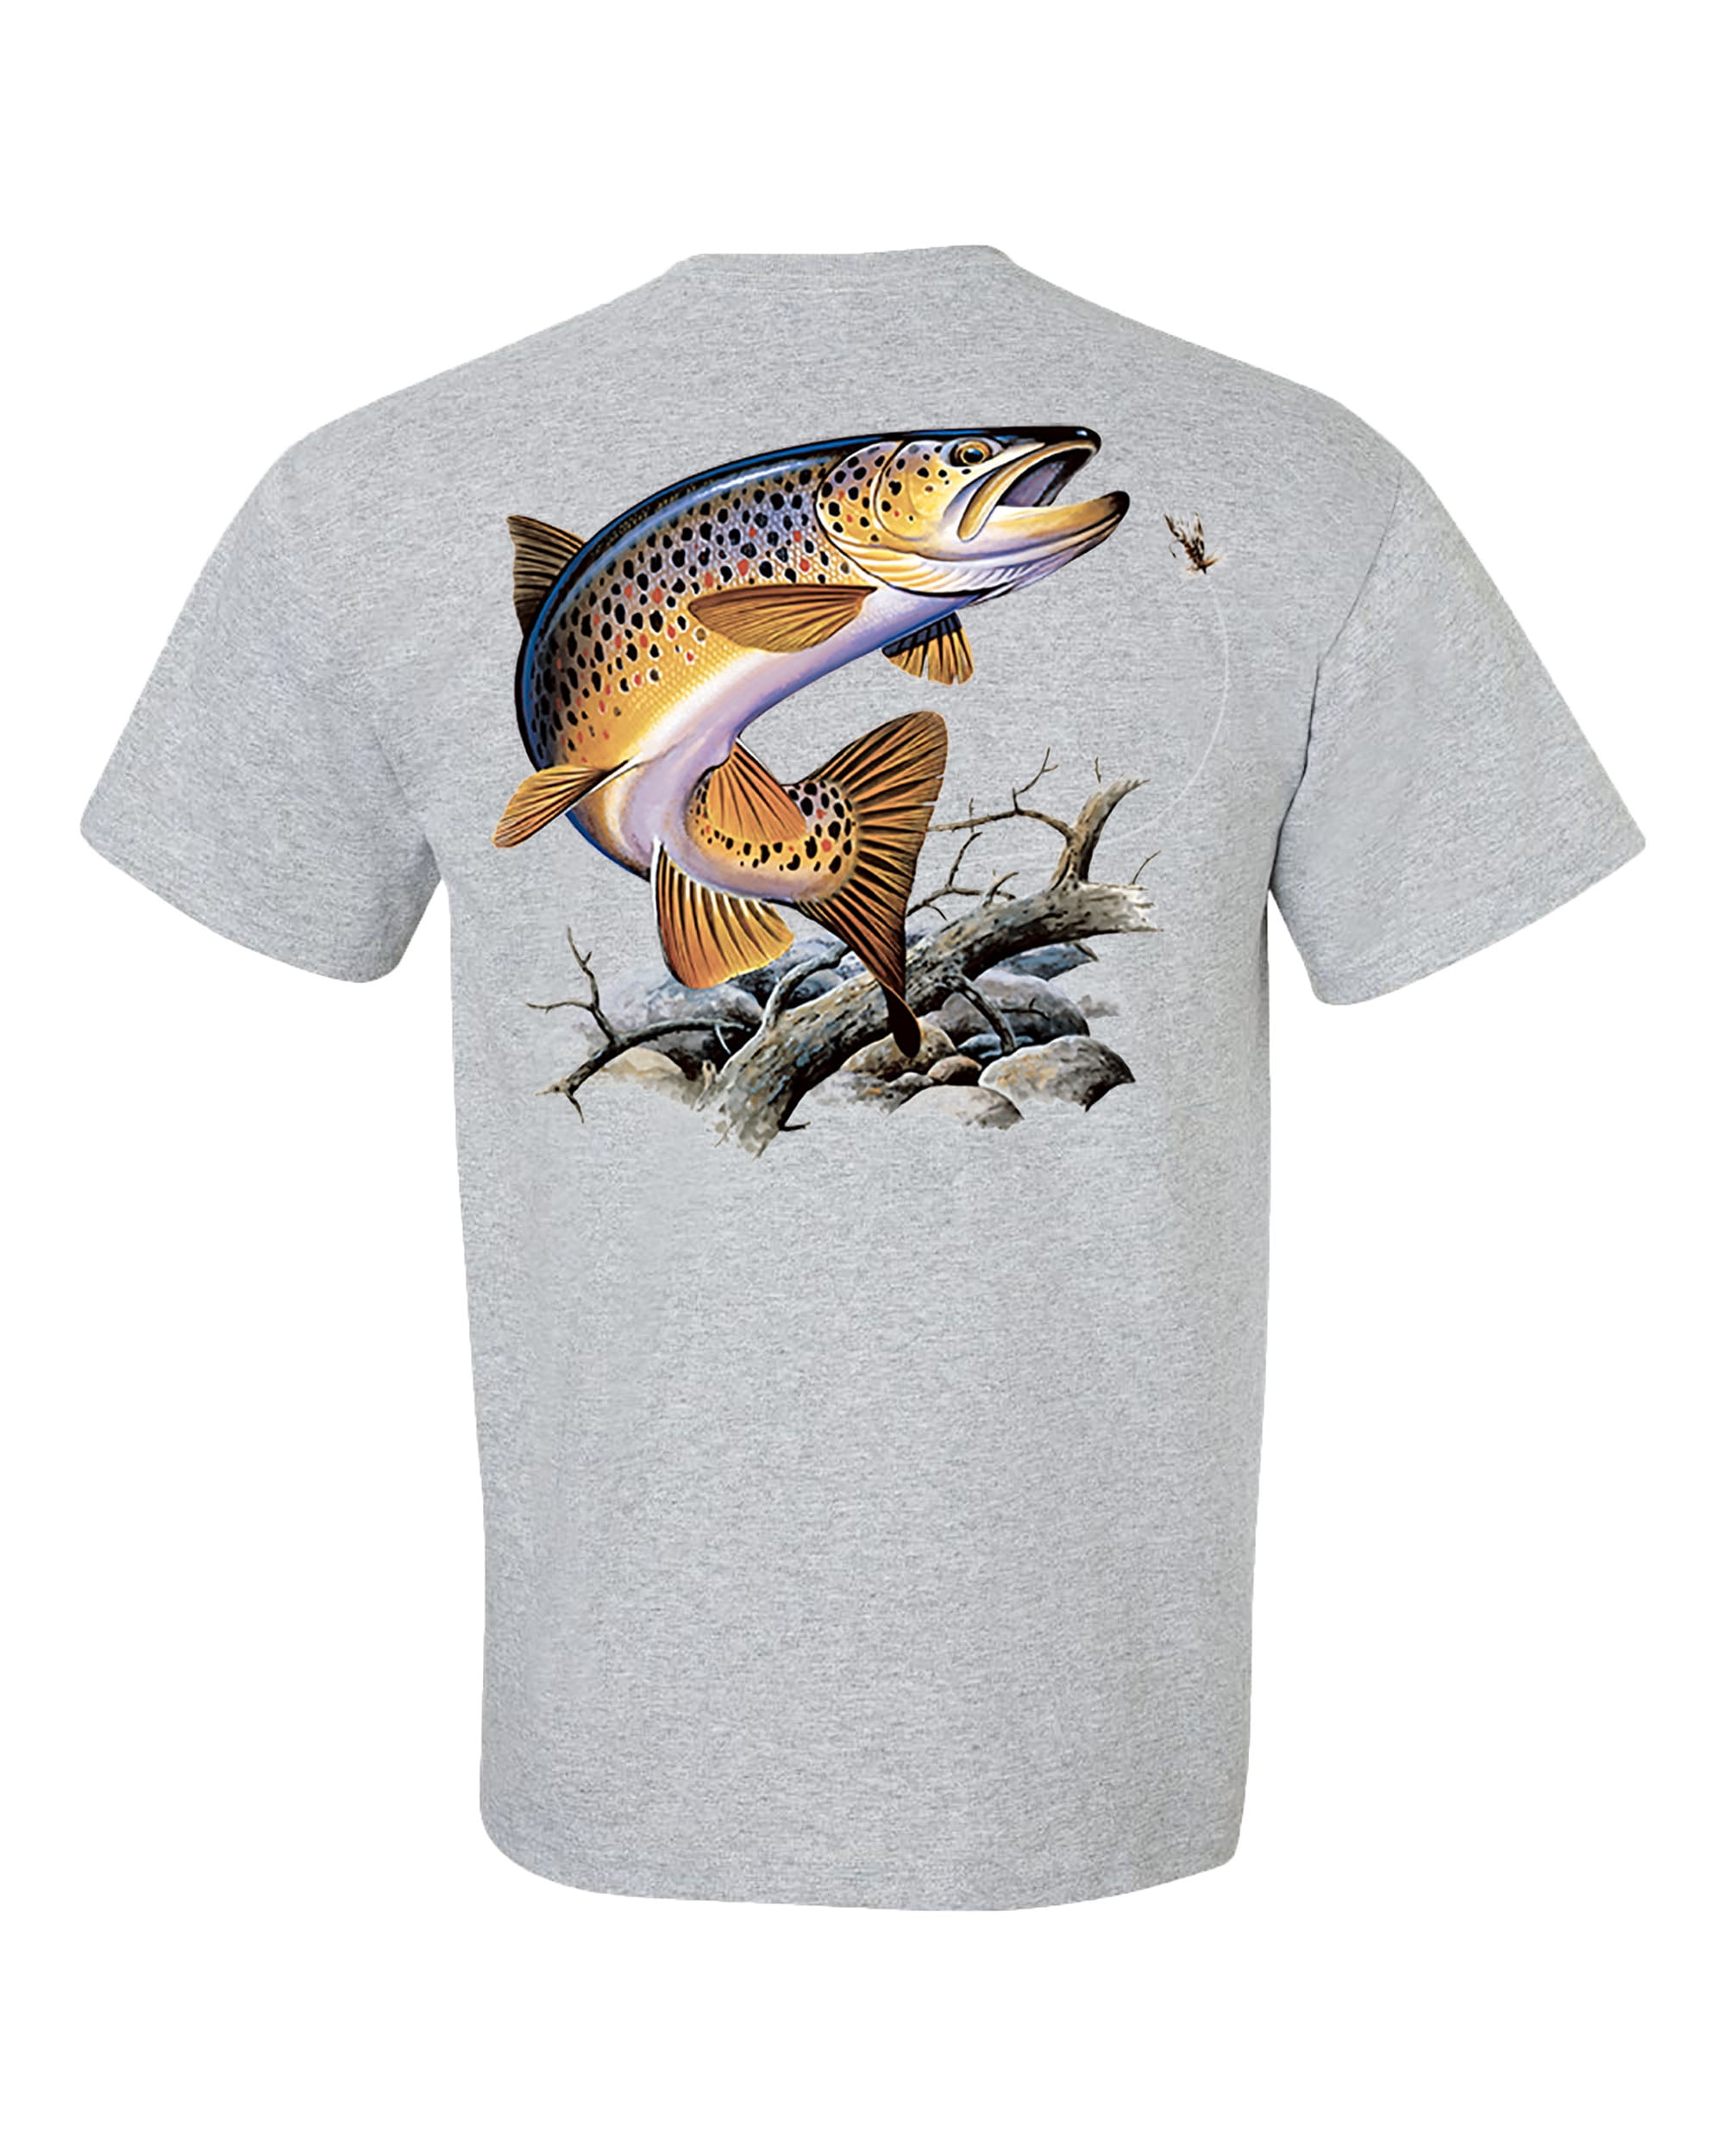 Fishing Brown Trout Adult Short Sleeve T-Shirt-Sports Gray-Large